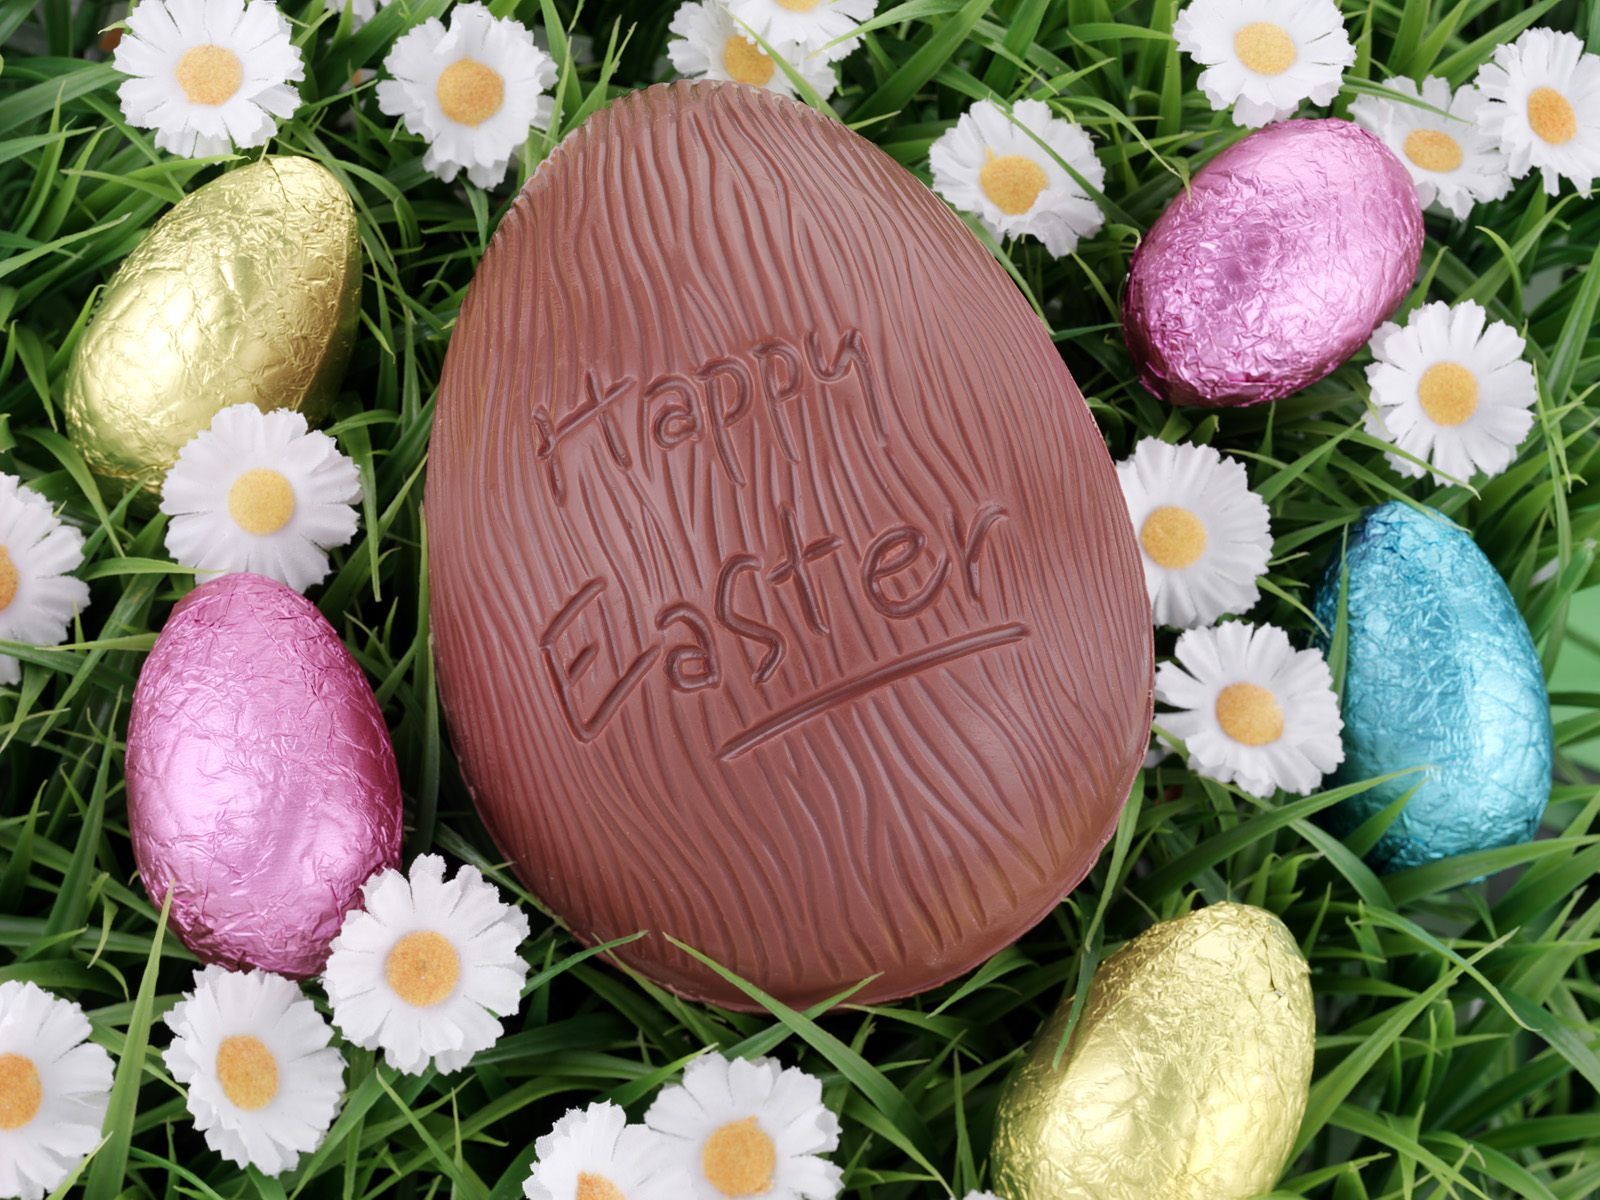 Wherever it came from, the Easter egg hunt is one of our favourite traditions. (www.drsukhi.com)